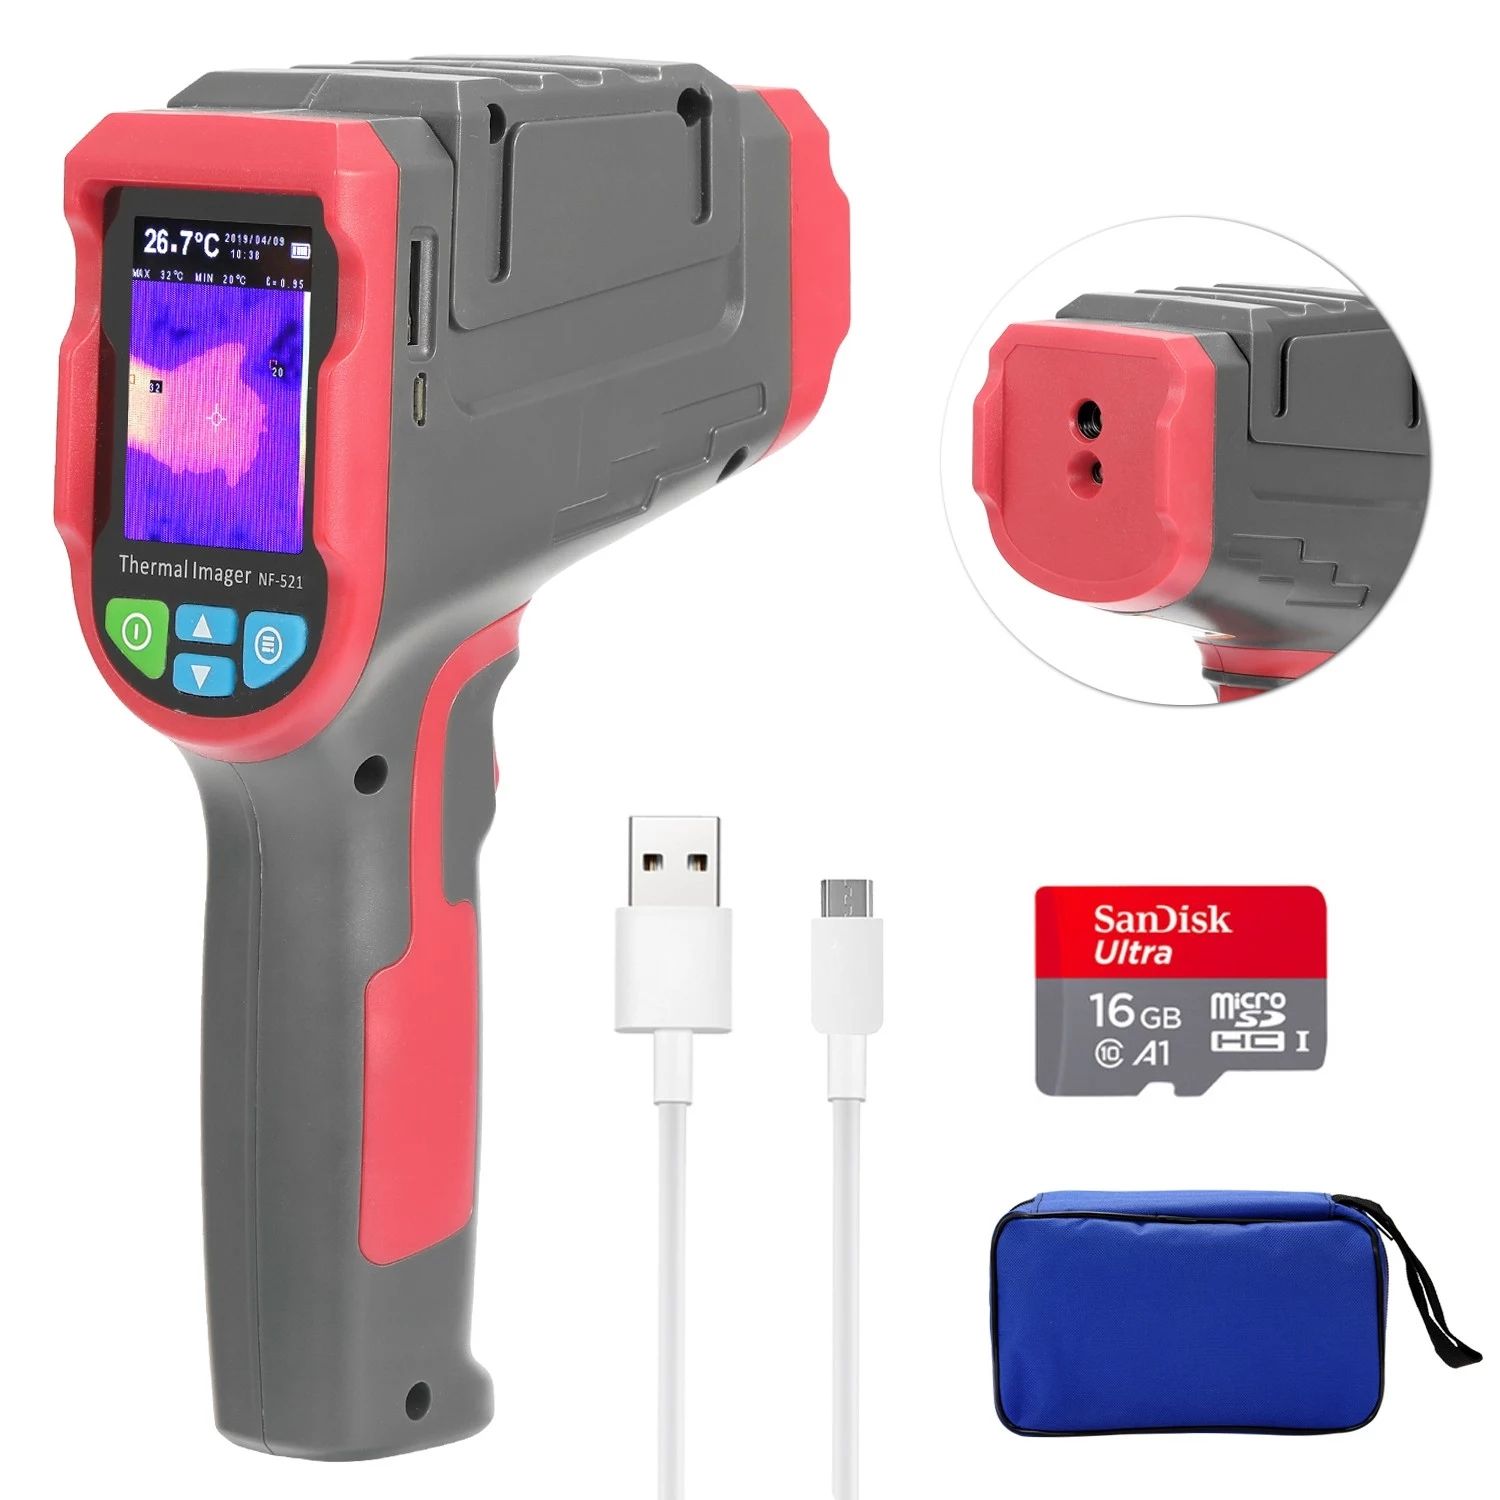 24-Inch-Portable-Infrared-Thermal-Imager-Handheld-Imaging-Camera-Digital-TFT-LCD-Display-Thermometer-1673570